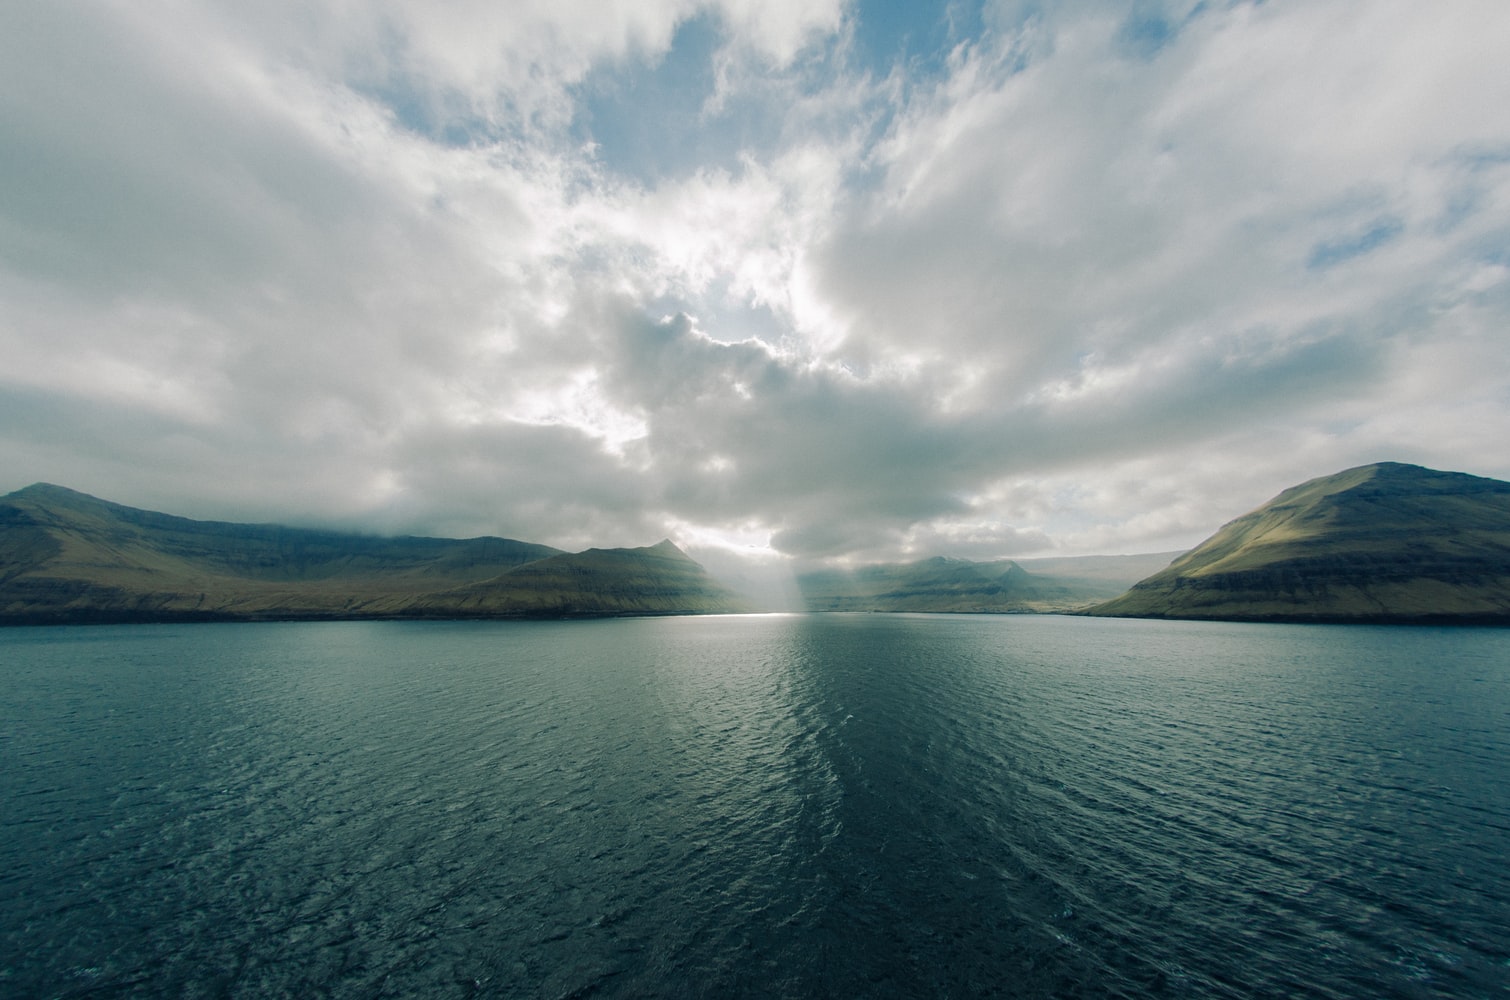 Sea view of Faroe Islands as the sun breaks through the clouds.